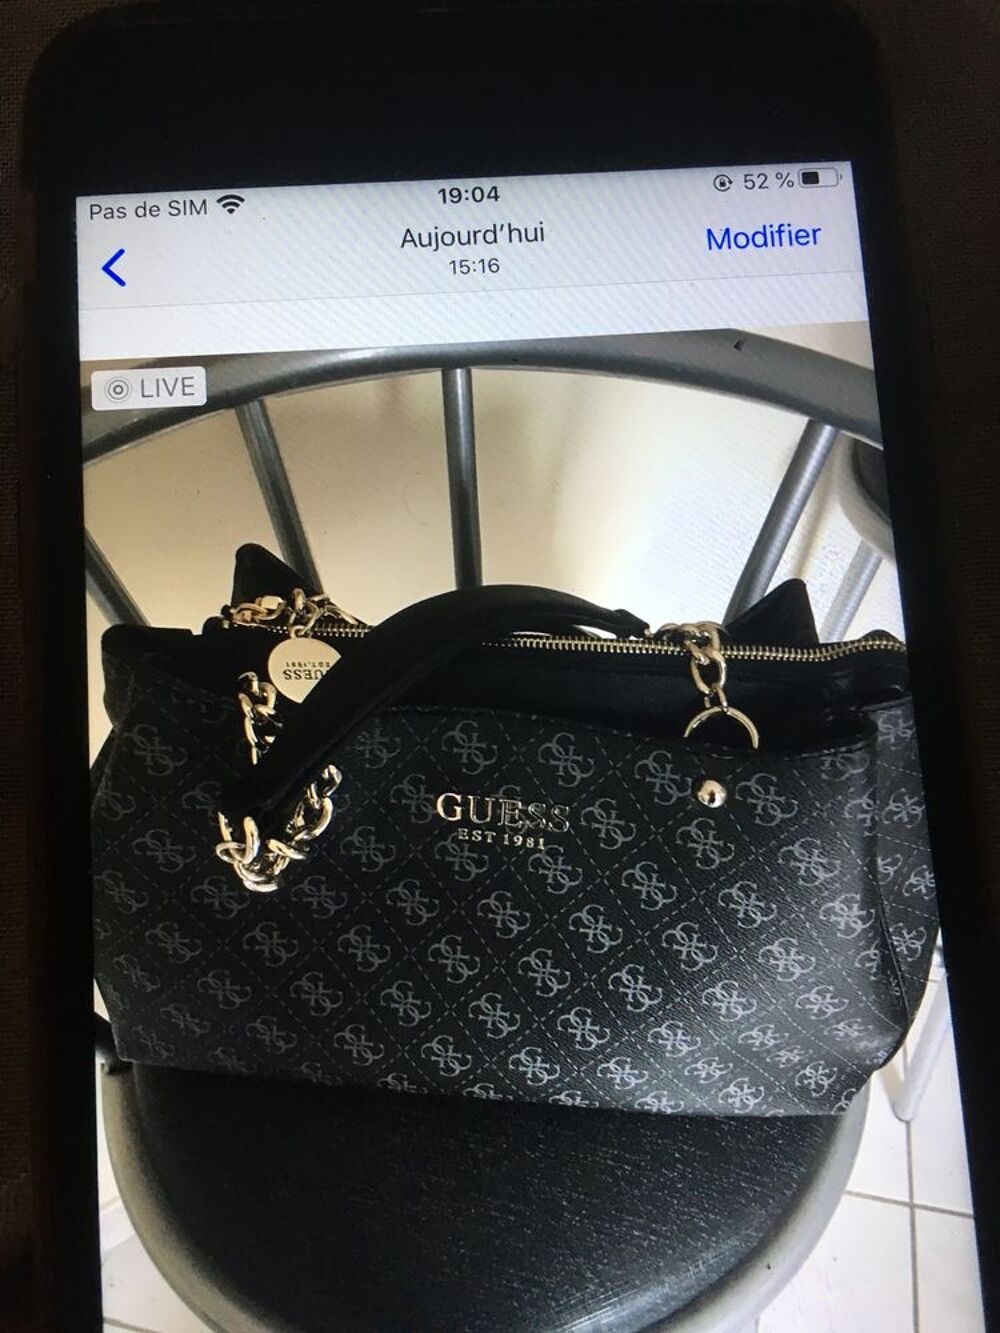 Sac guess neuf, parka Morgan neuve et chaussure repetto Maroquinerie